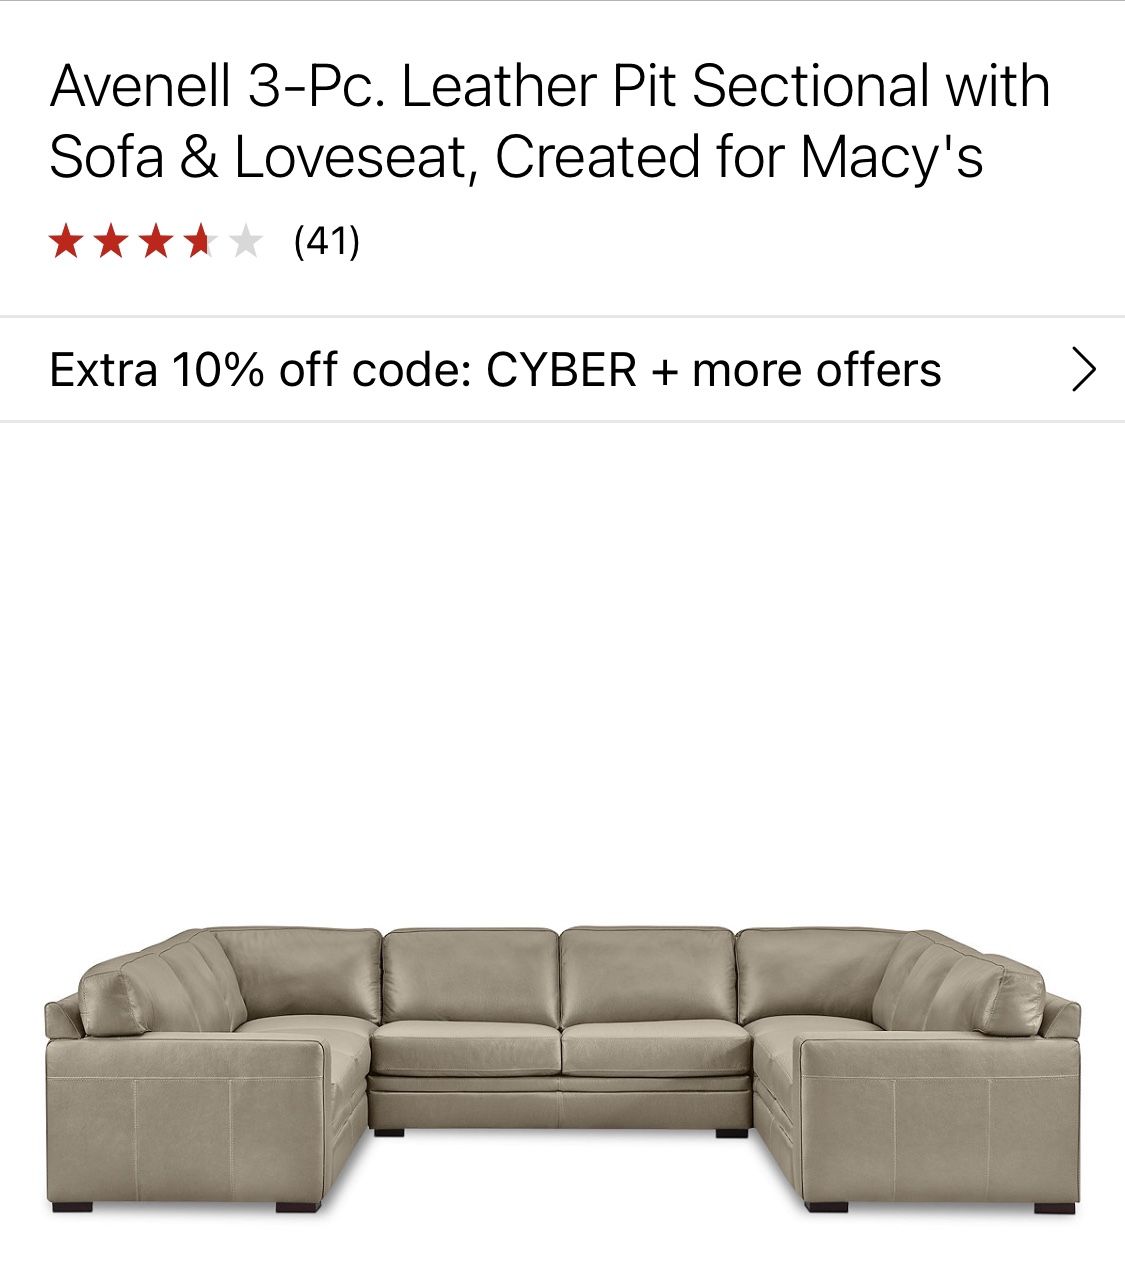 Macy’s Avnell 3-Pc. Leather Pit Sectional with Sofa & Love Seat